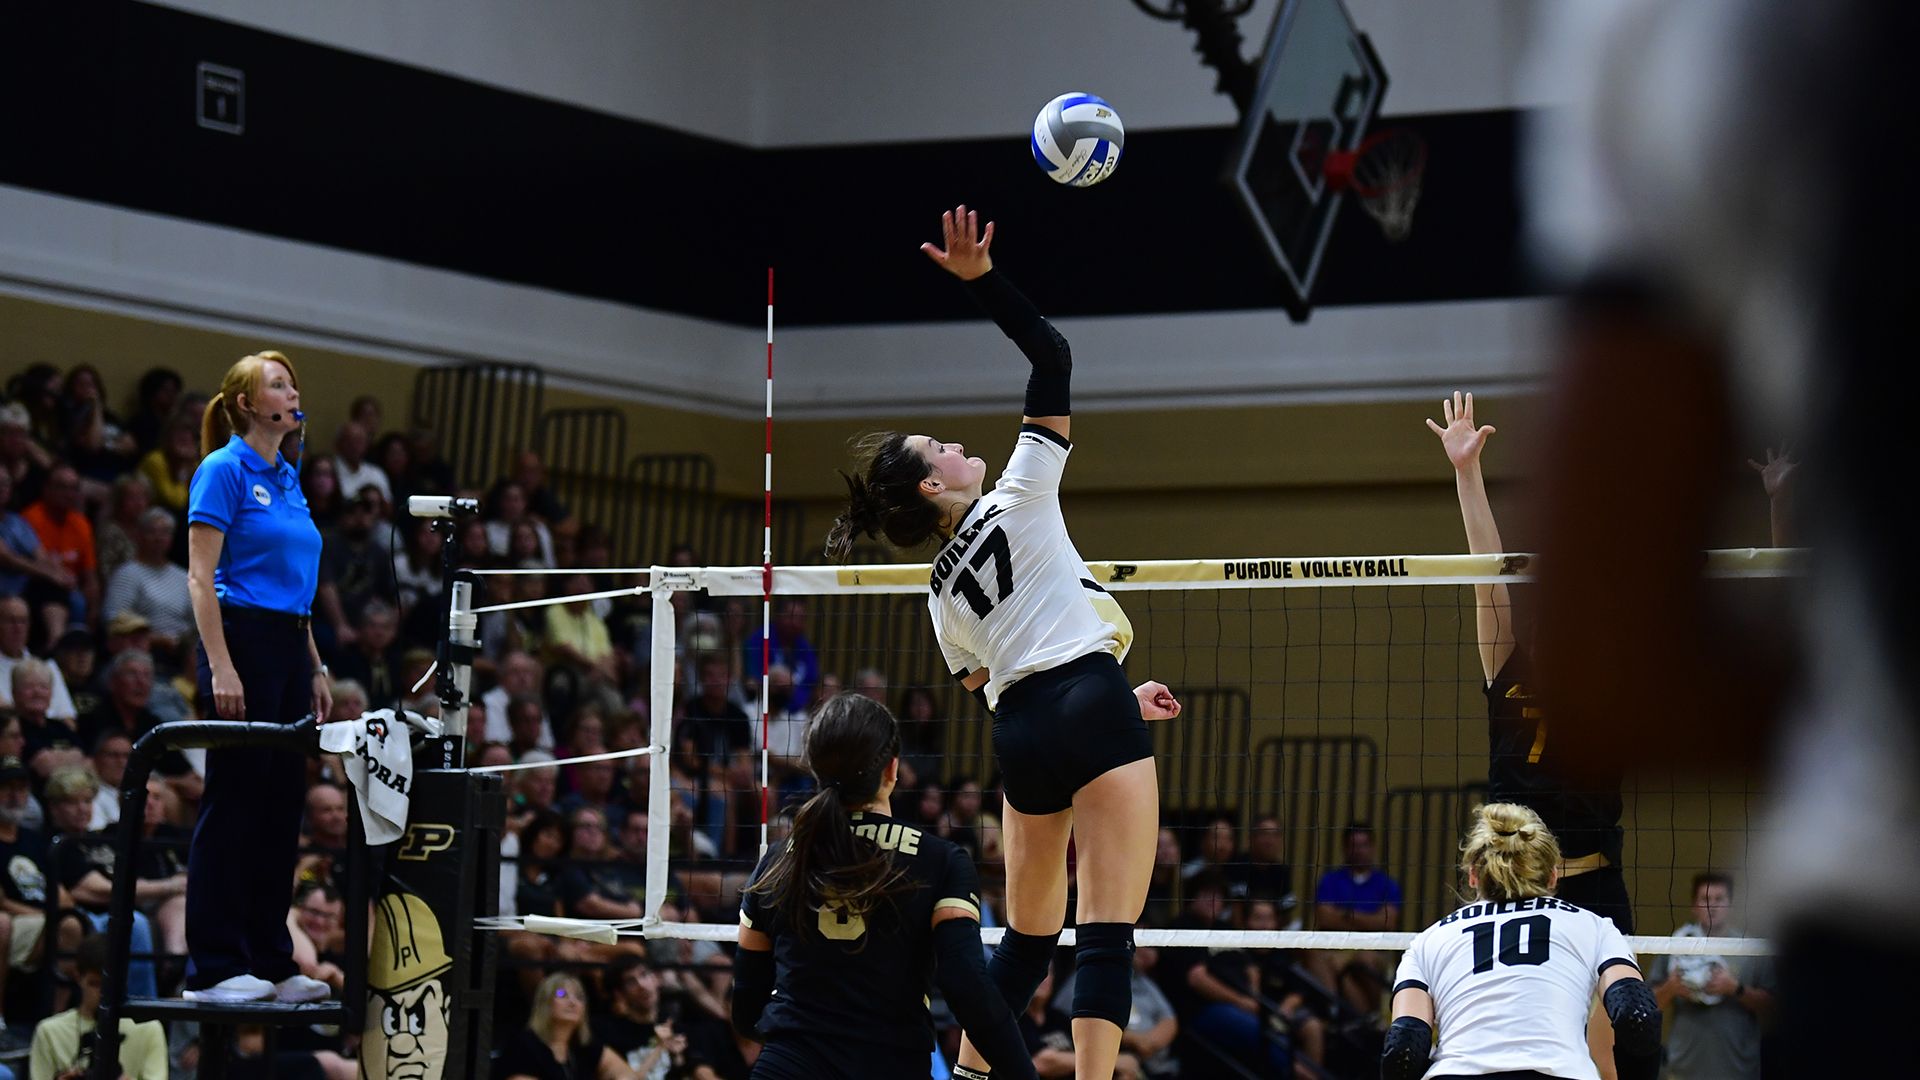 10th Ranked Purdue Sweeps Northern Kentucky